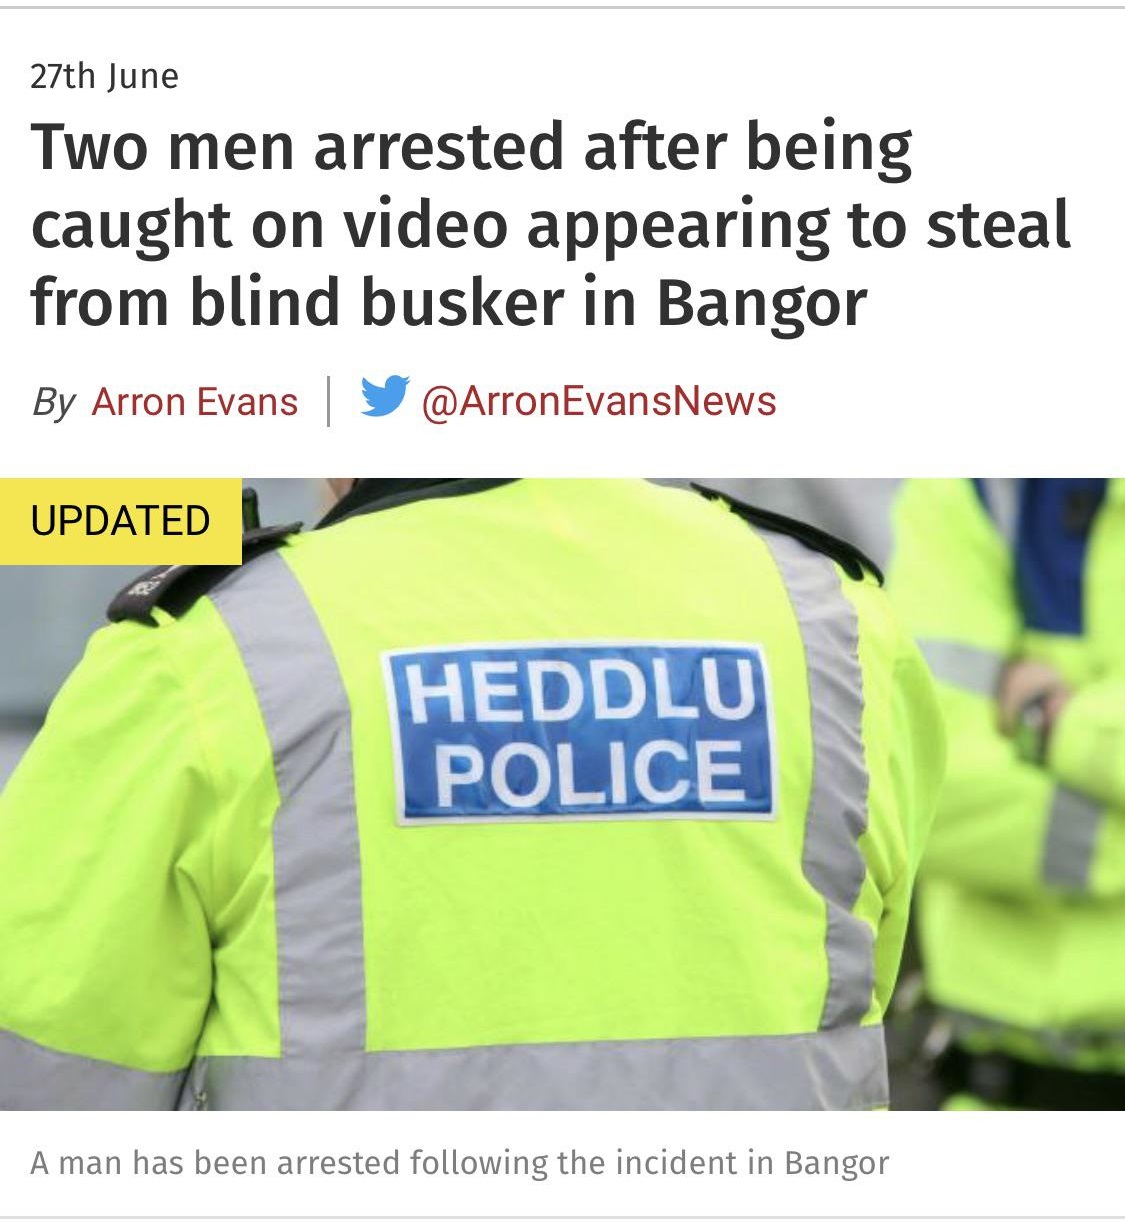 t shirt - 27th June Two men arrested after being caught on video appearing to steal from blind busker in Bangor By Arron Evans | Y Updated Heddlu Police A man has been arrested ing the incident in Bangor